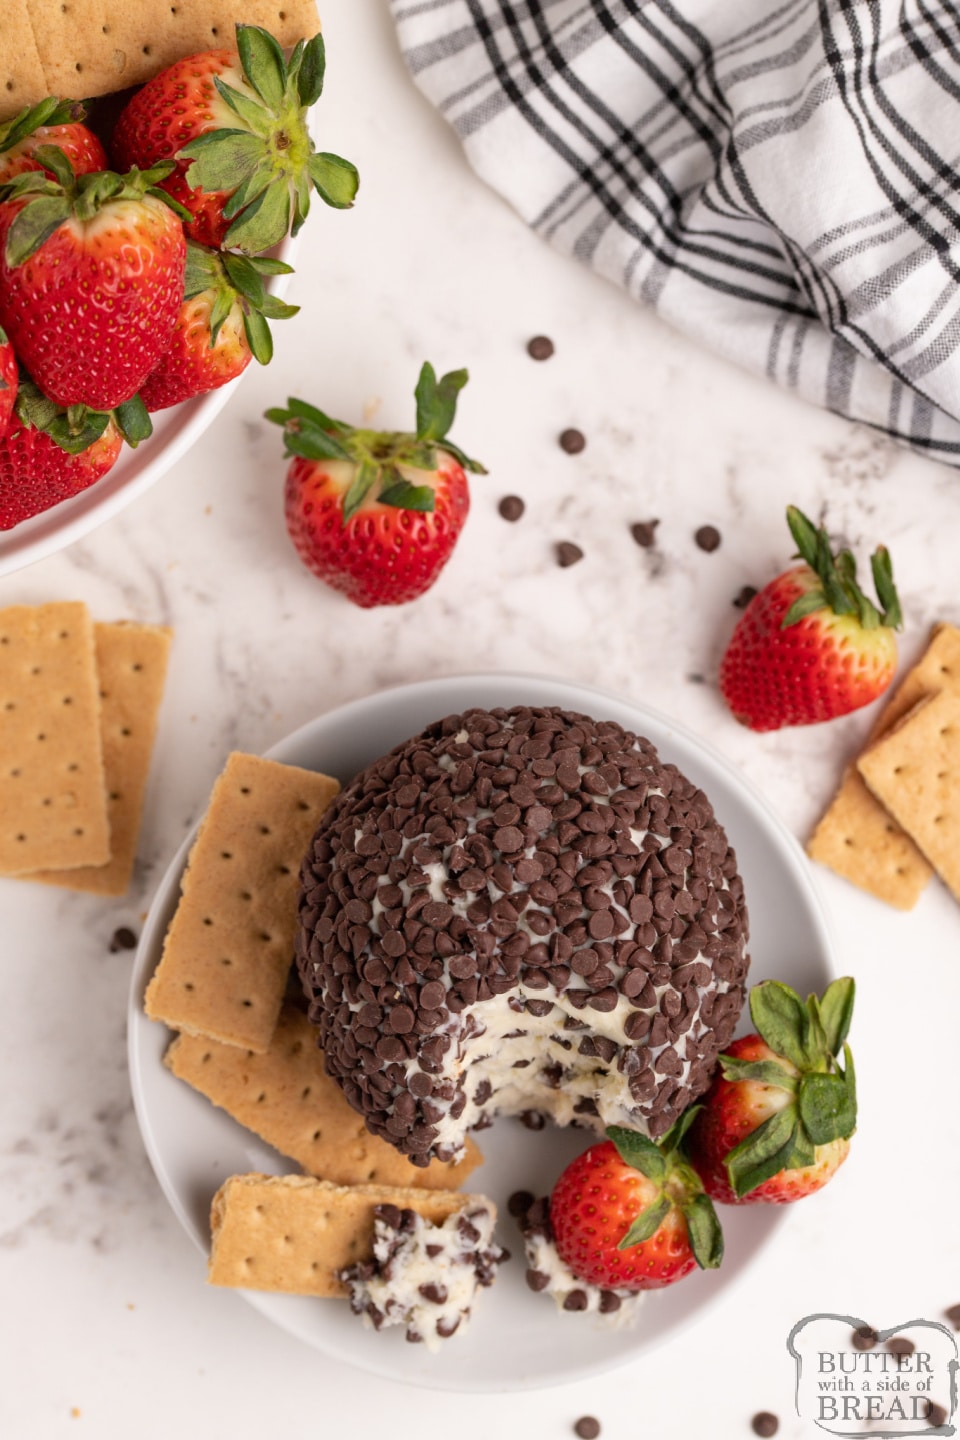 Cheesecake Cheese Ball recipe made with only 5 ingredients for an easy appetizer! This chocolate chip cheesecake cheese ball pairs perfectly with fresh strawberries and graham crackers and only takes a few minutes to make!